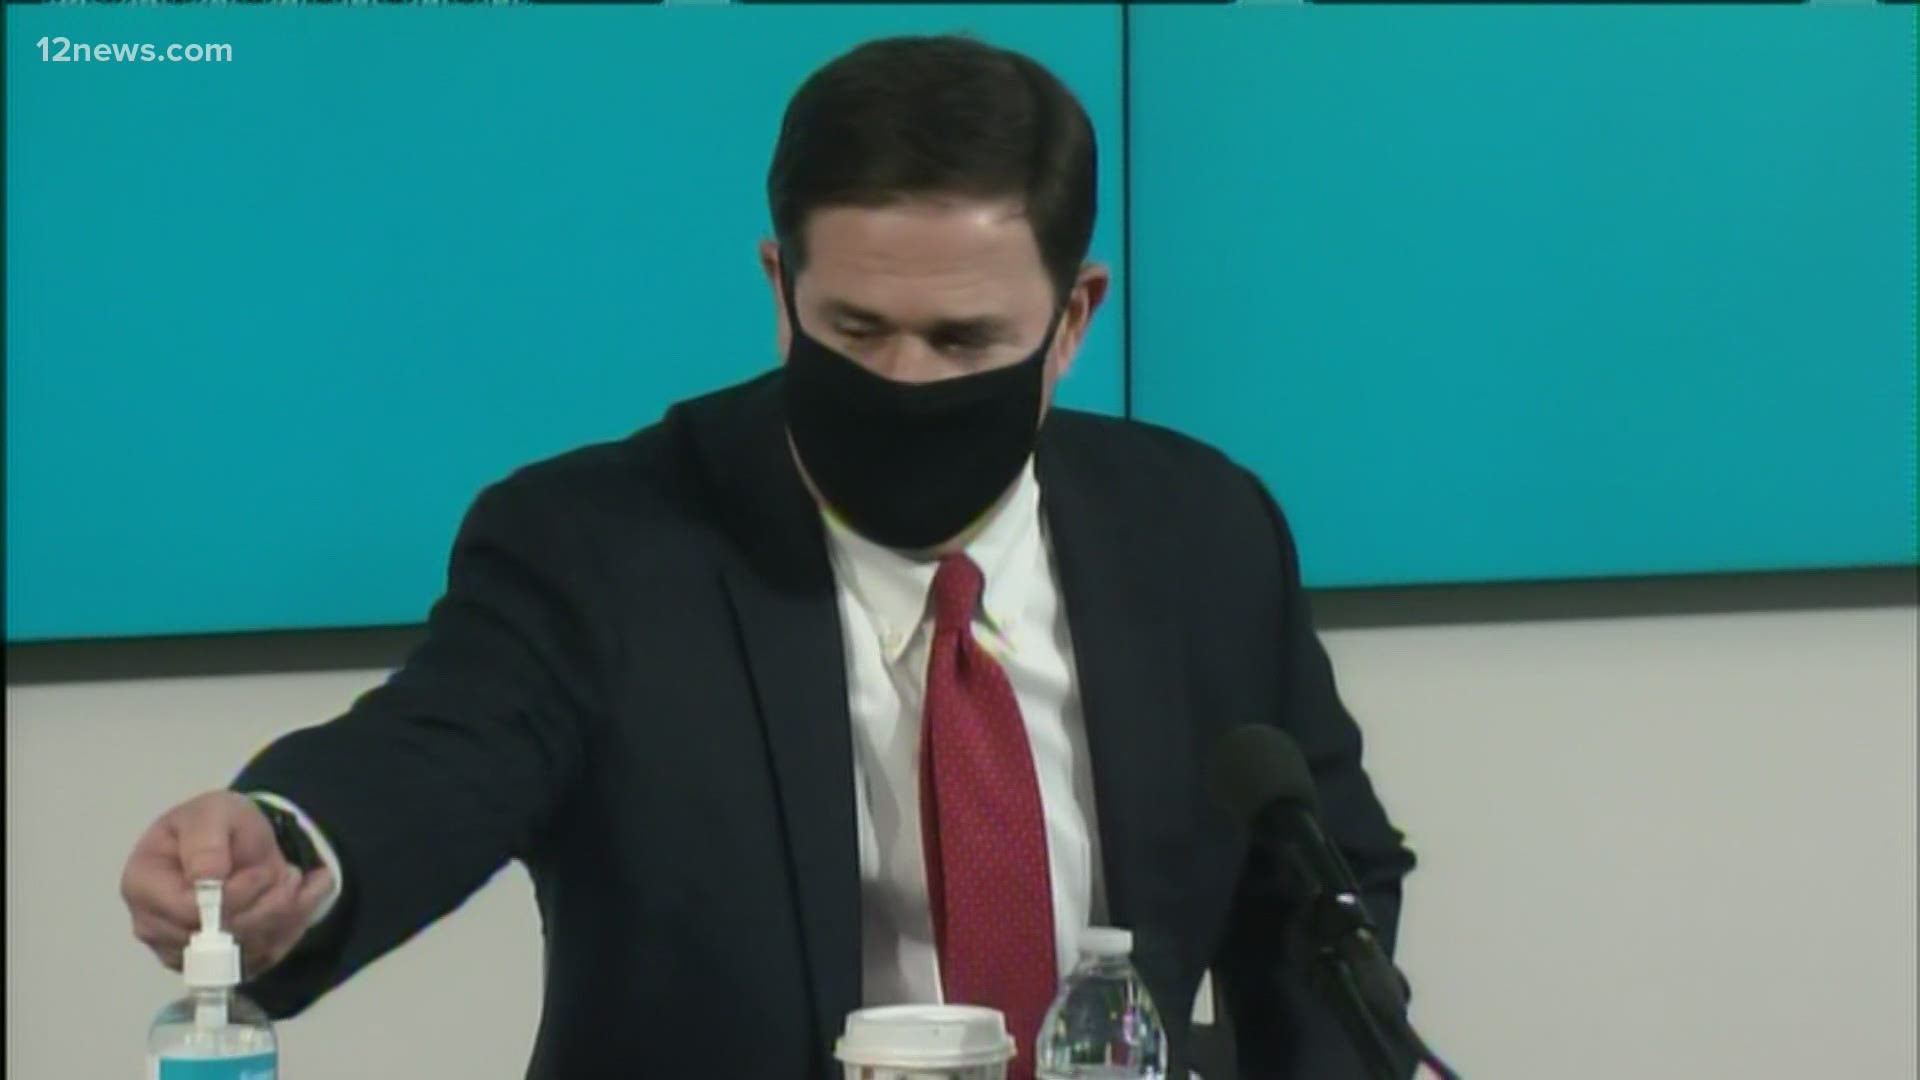 For almost two weeks Arizona's been in the news as one of the nation's coronavirus hot spots. Today, Gov. Ducey announced cities can set their own mask requirements.